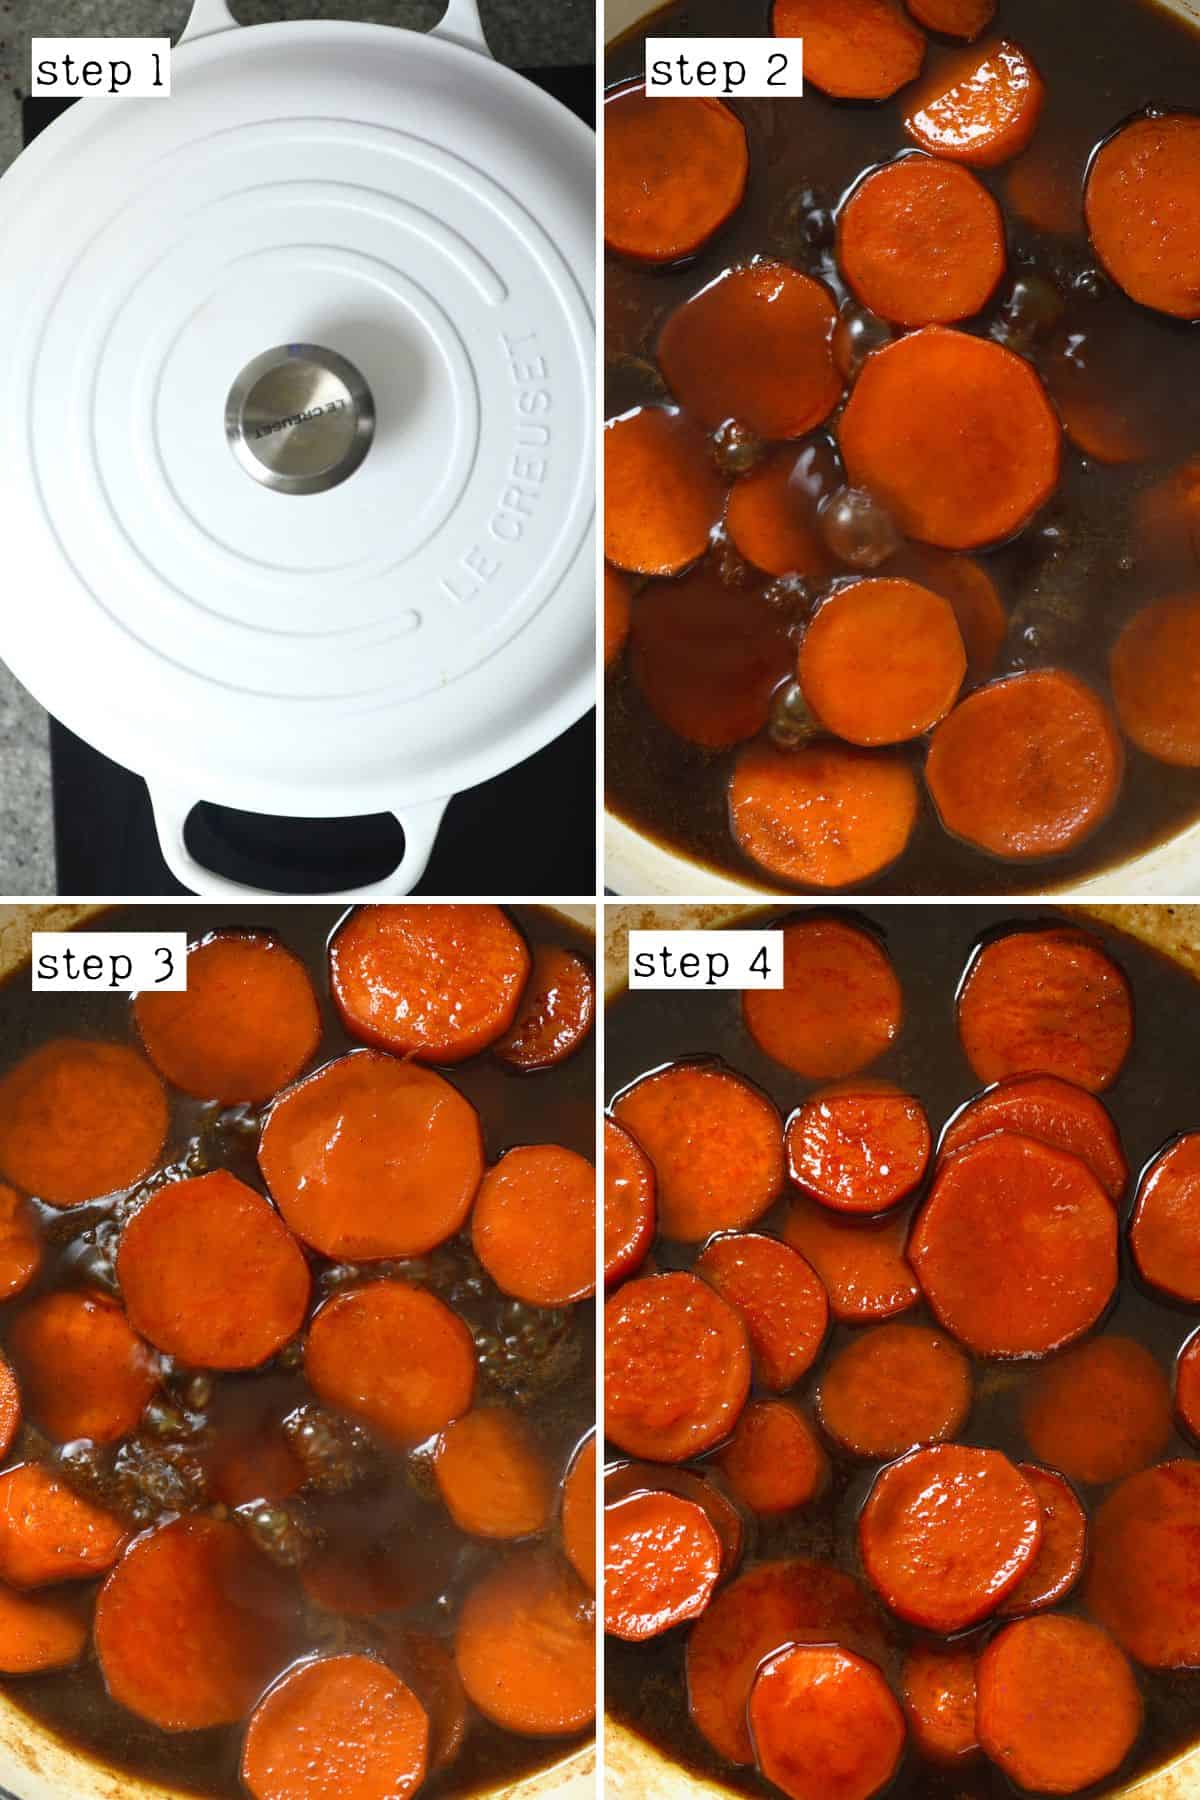 Steps for making candied yams